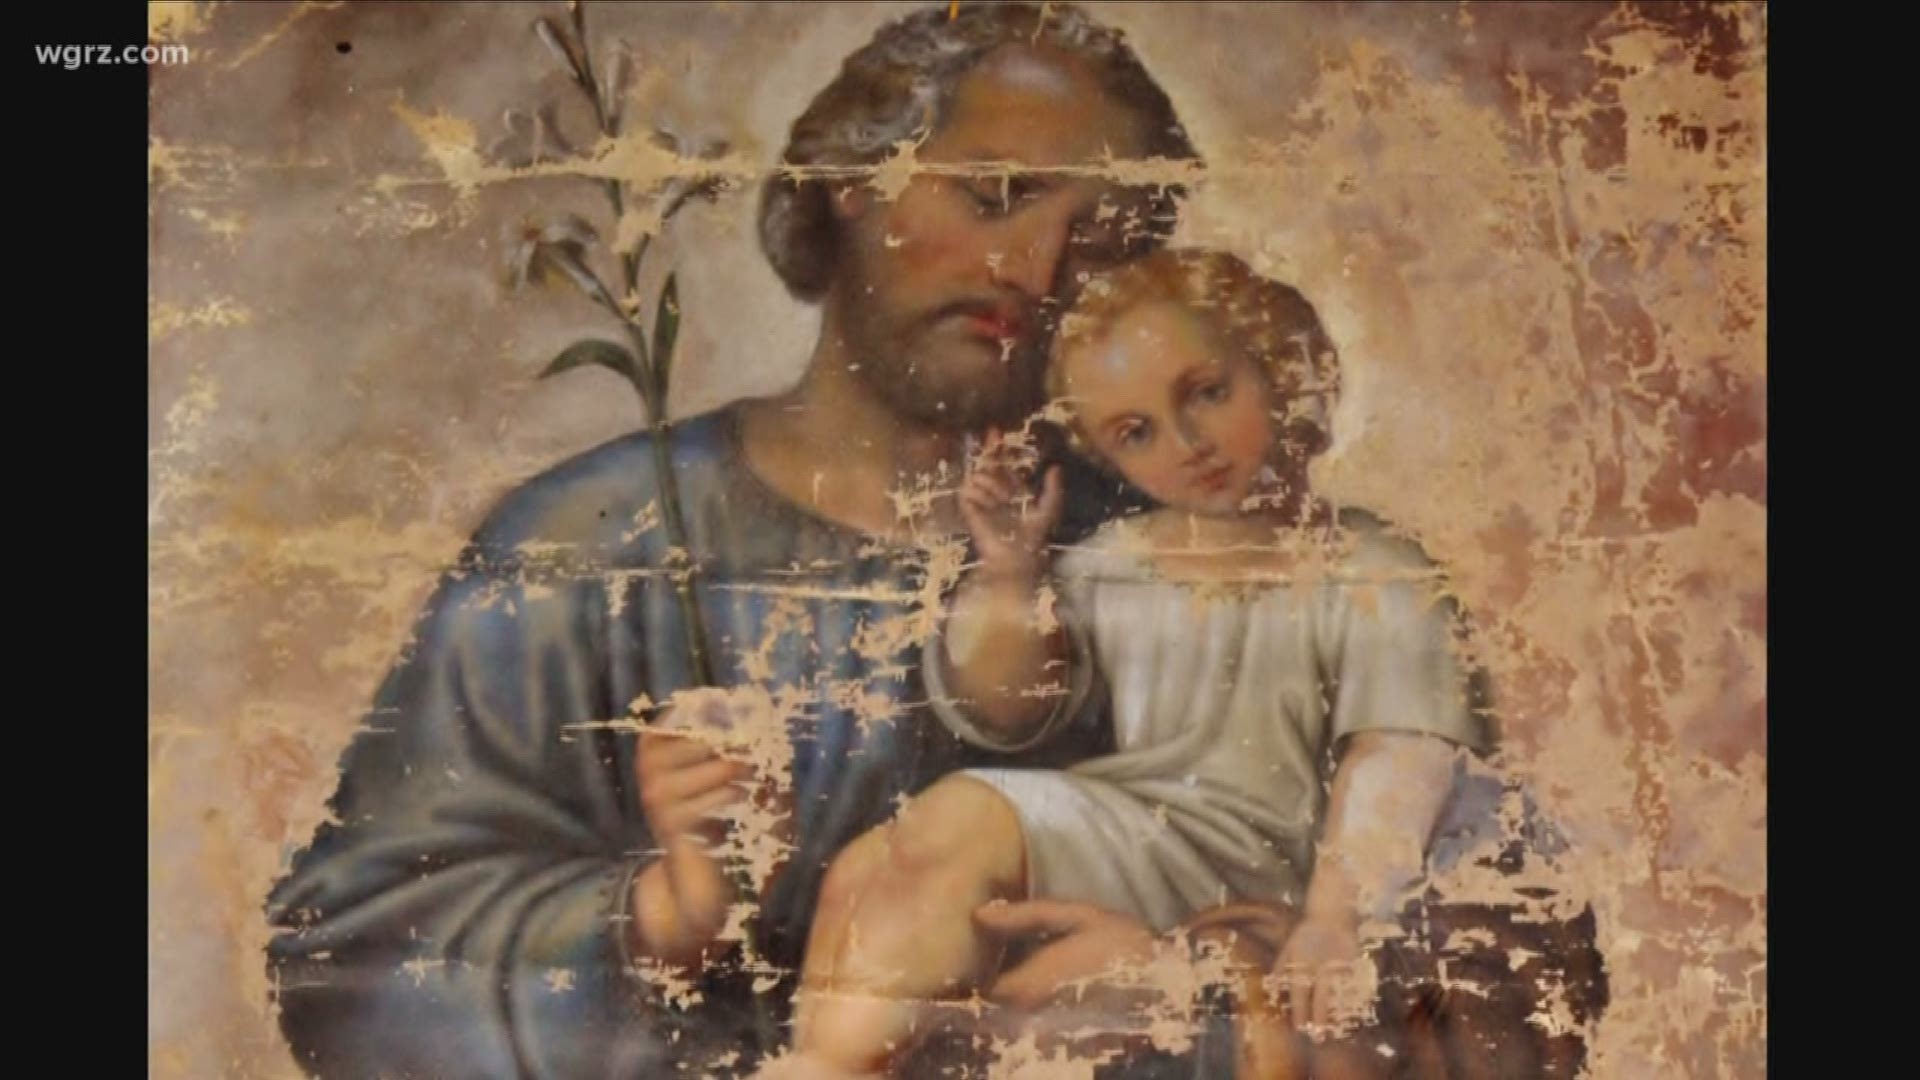 Mystery painting discovered in church basement